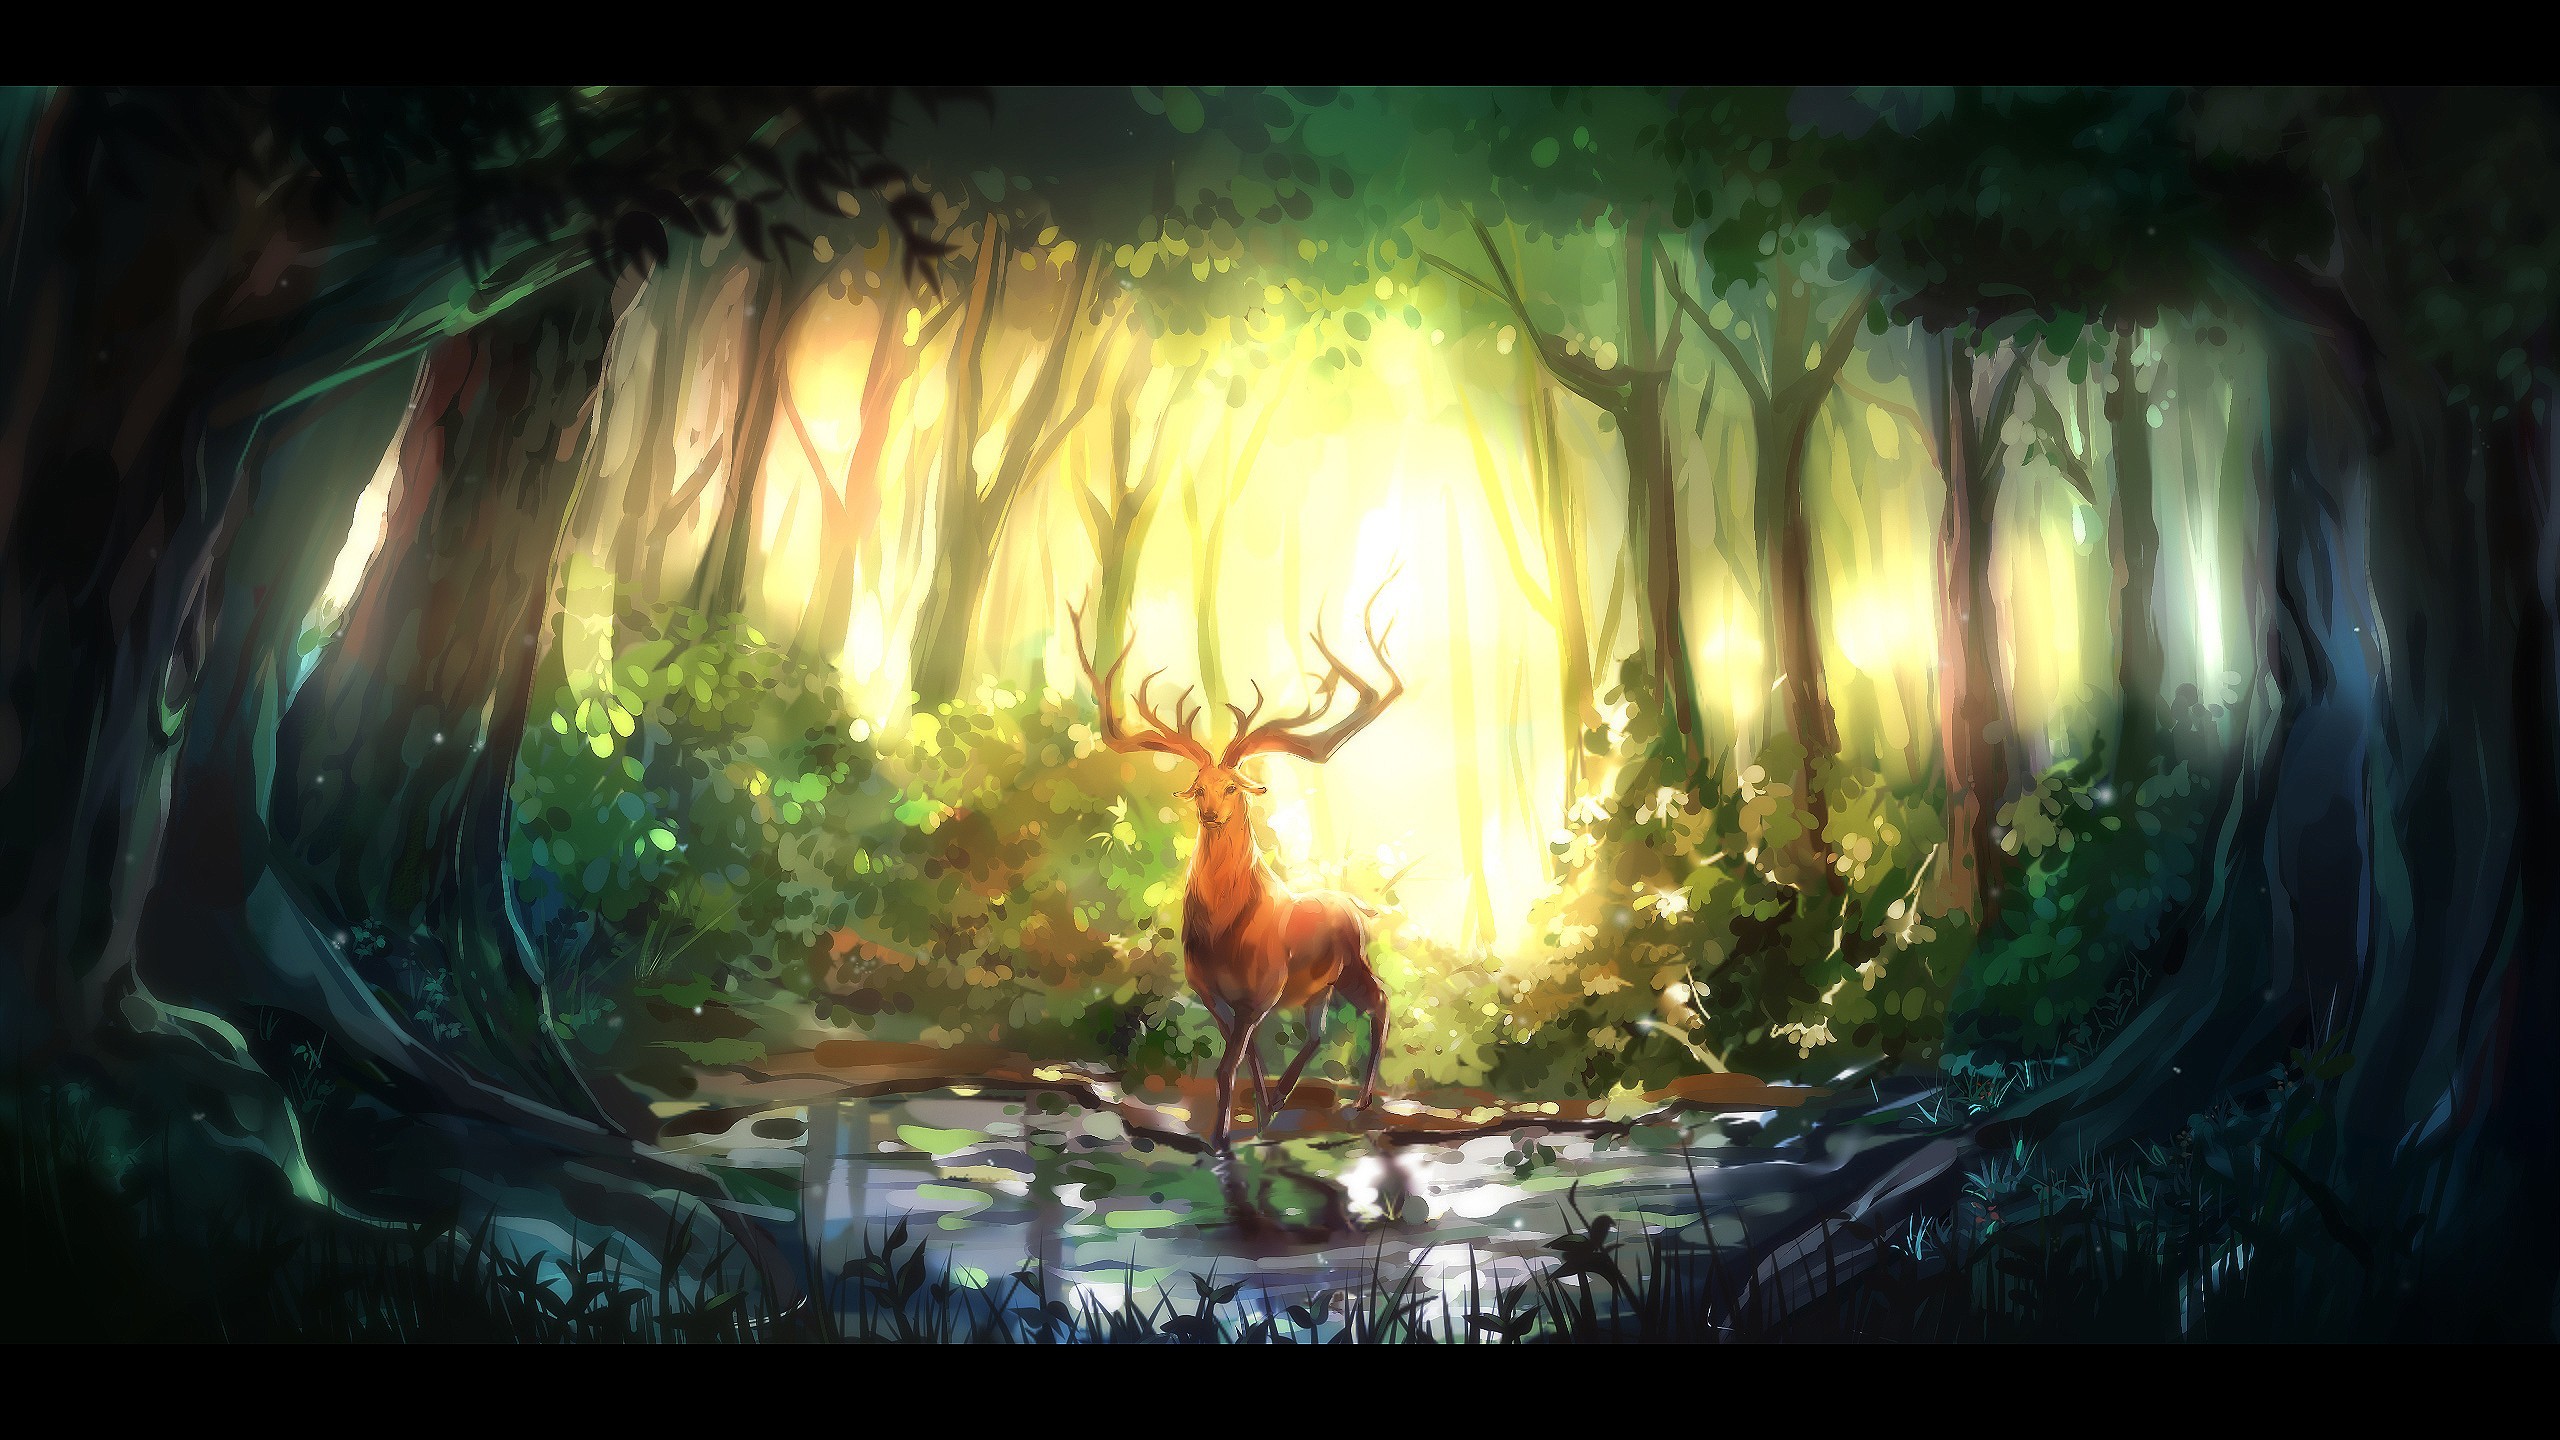 Anime Forest Scenery wallpaper in 1920x1080 resolution